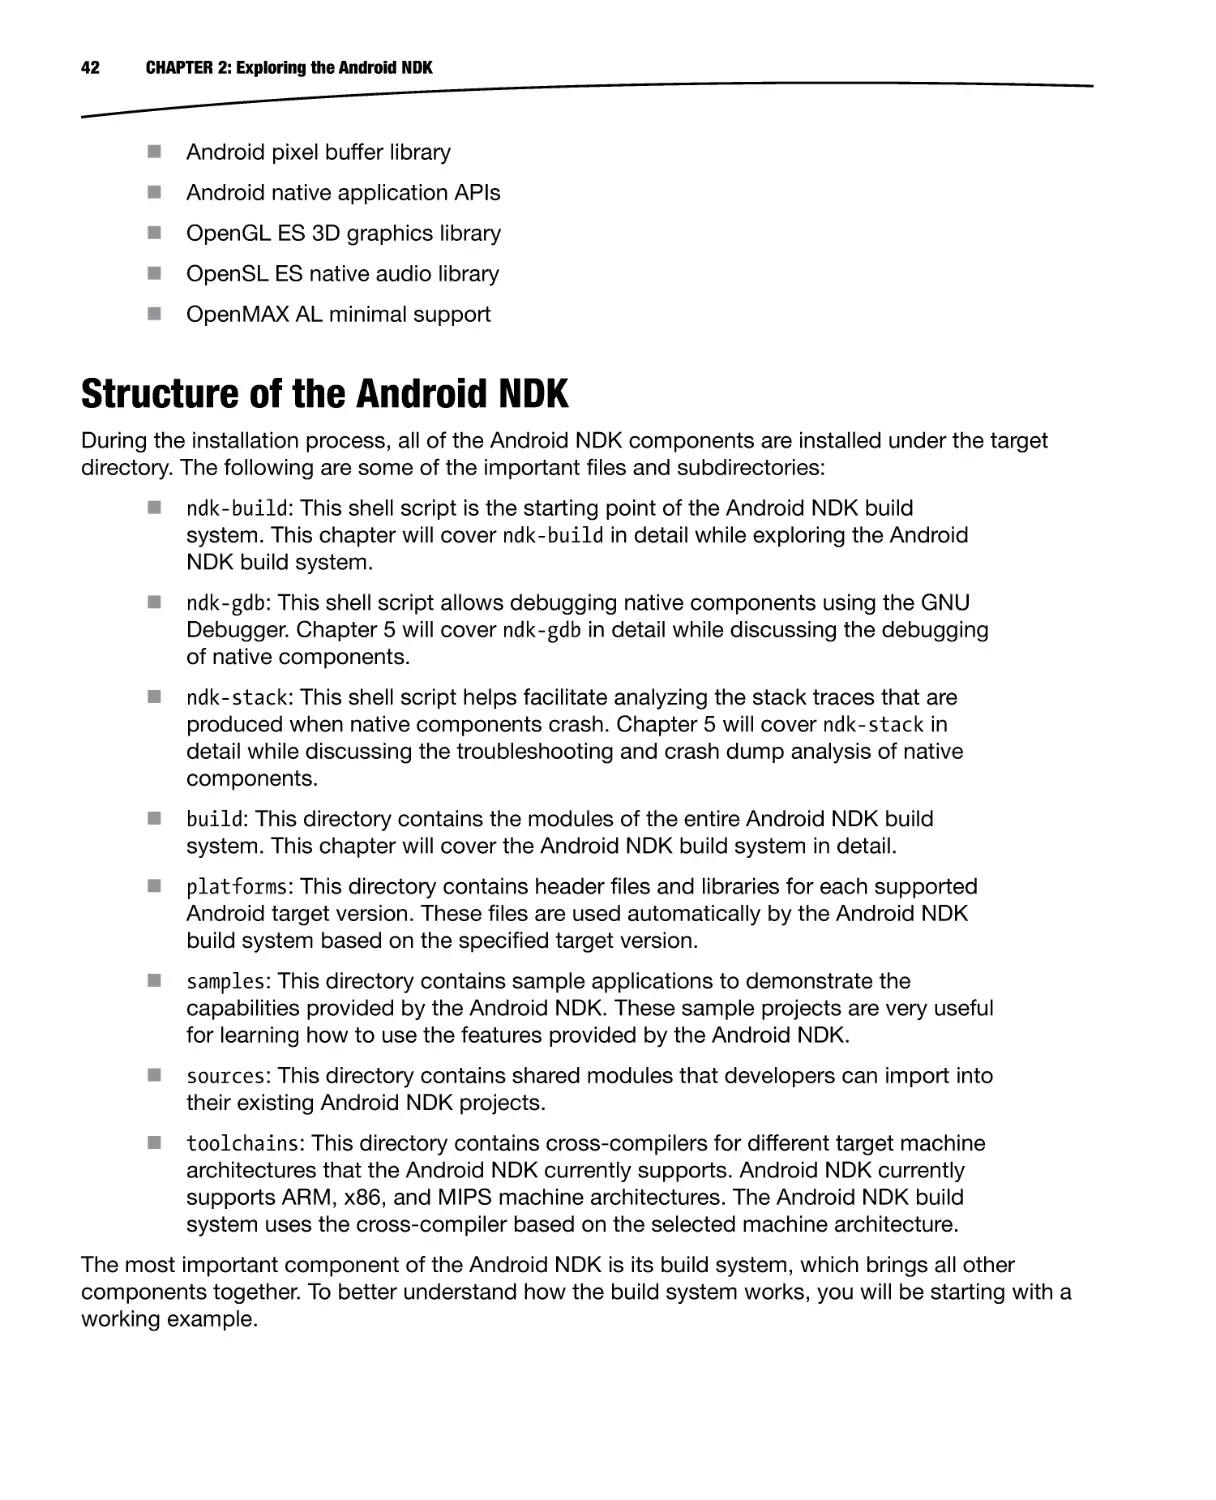 Structure of the Android NDK